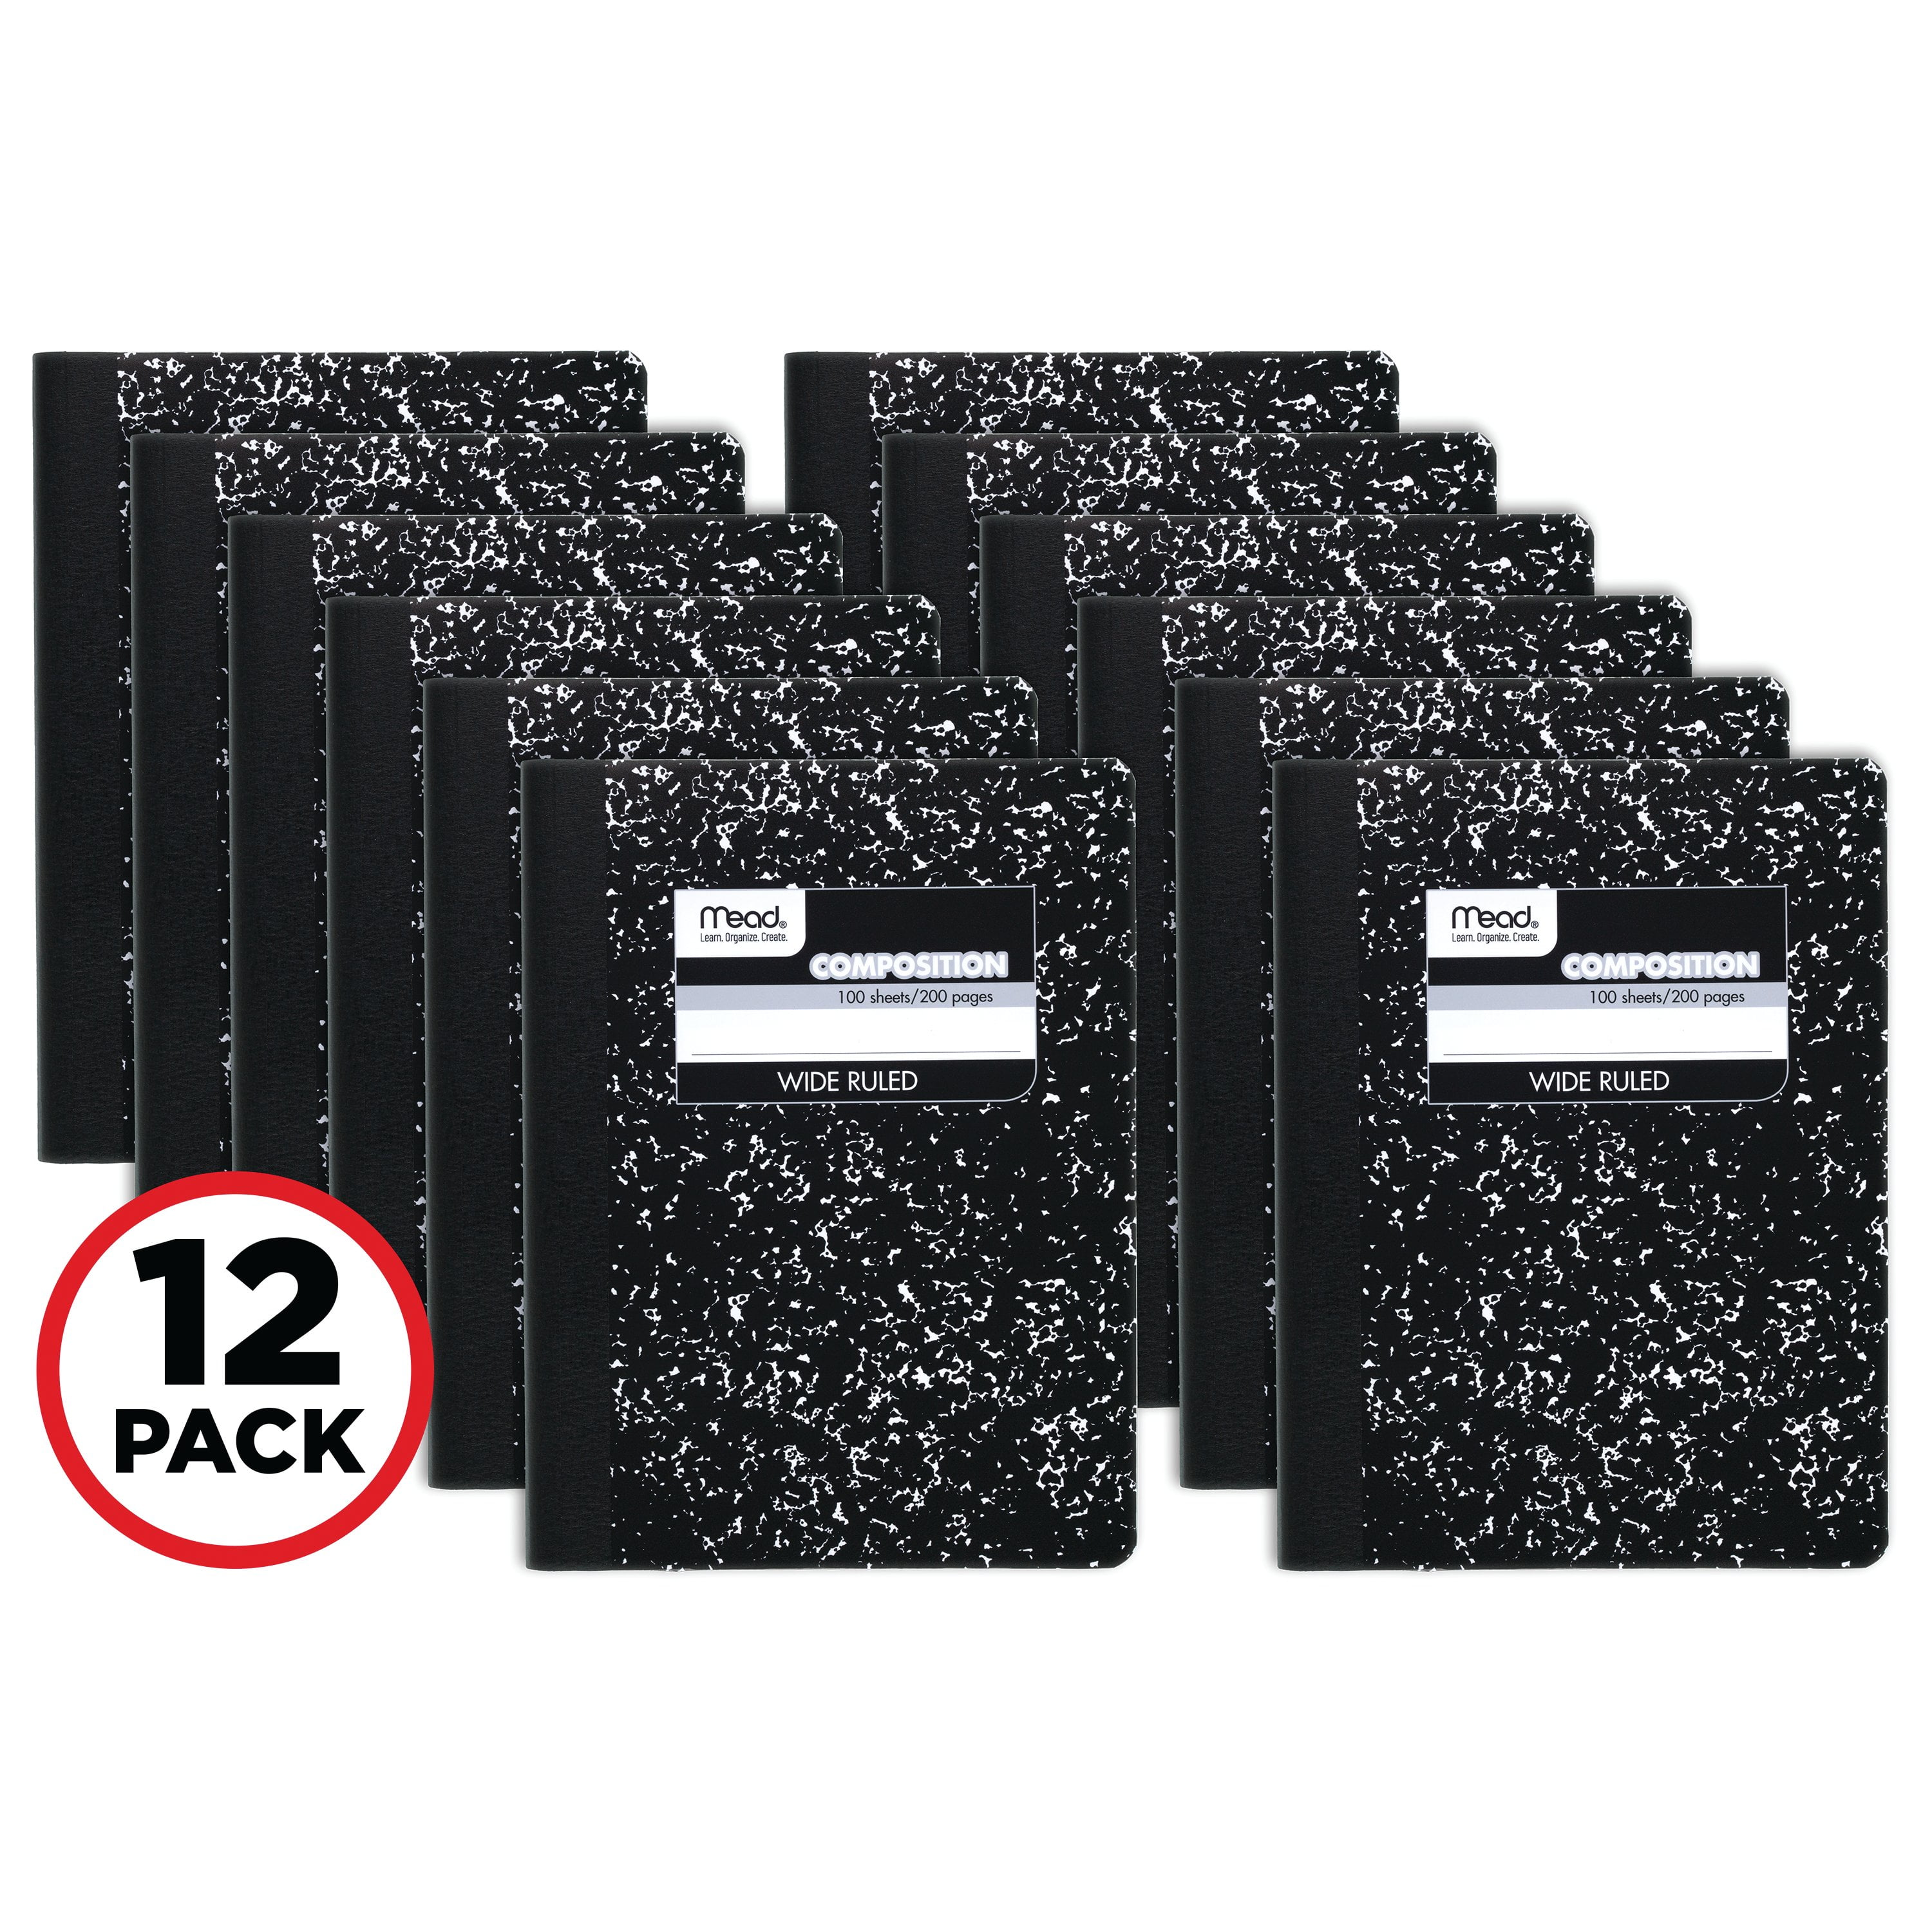 Mead Composition Book pack of 2 